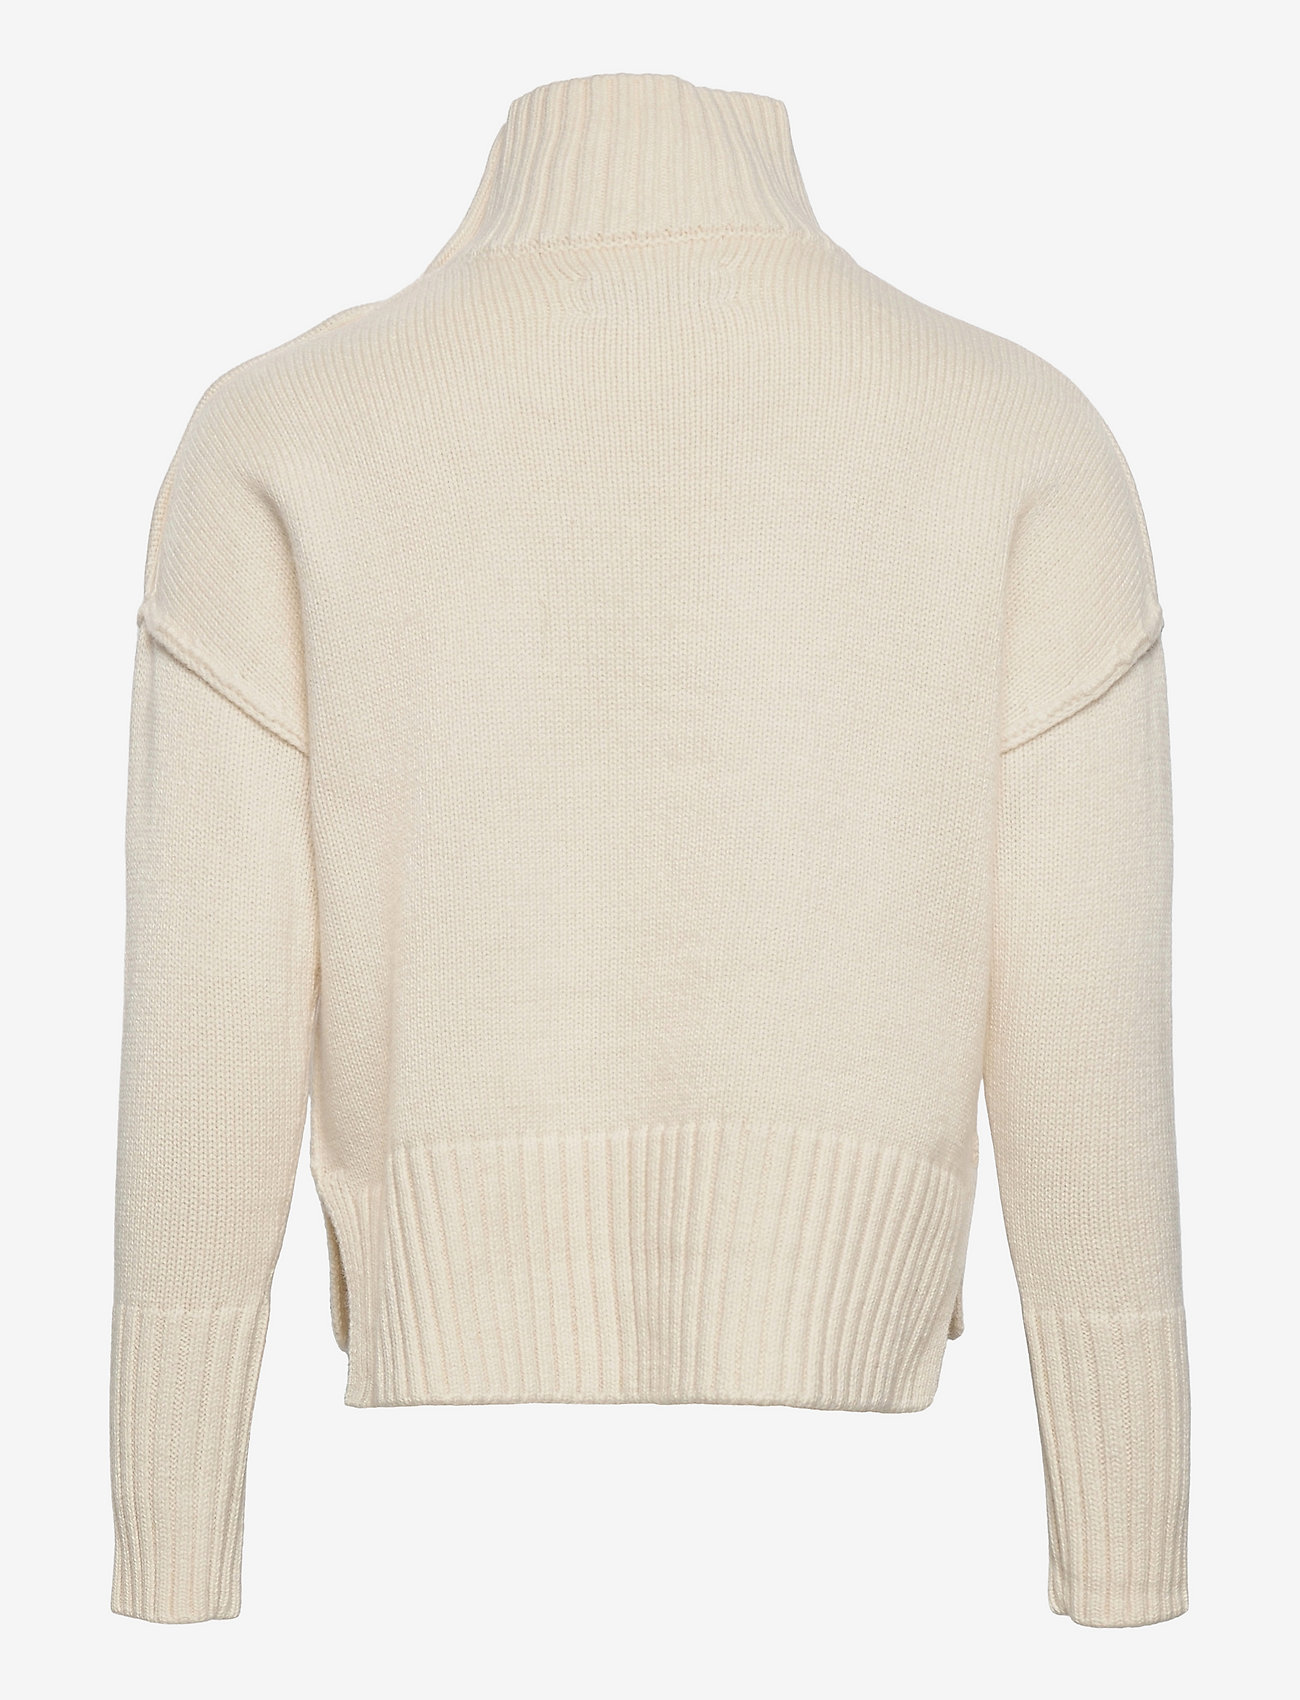 Zadig & Voltaire Kids - POLO NECK SWEATER OR JUMPER - jumpers - ivory - 1